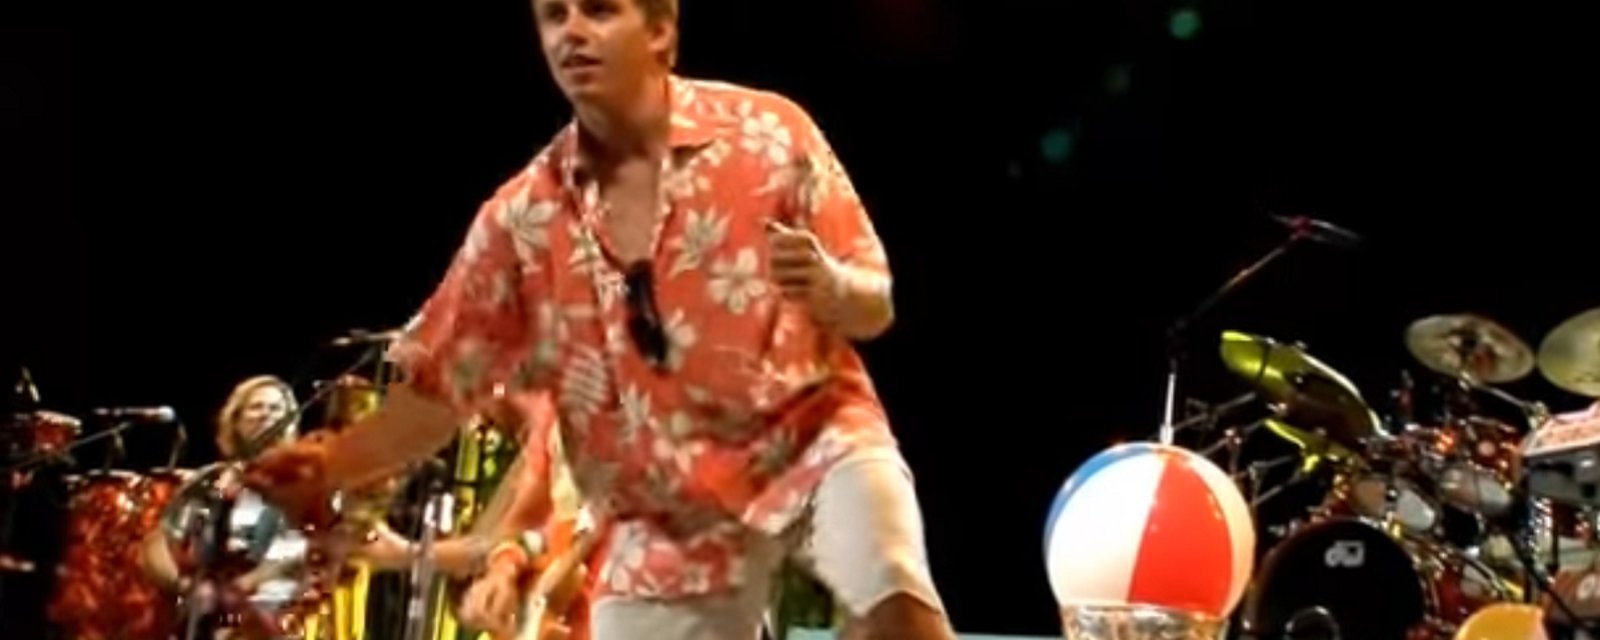 In honor of the late Jimmy Buffett: The Kaner Shuffle.